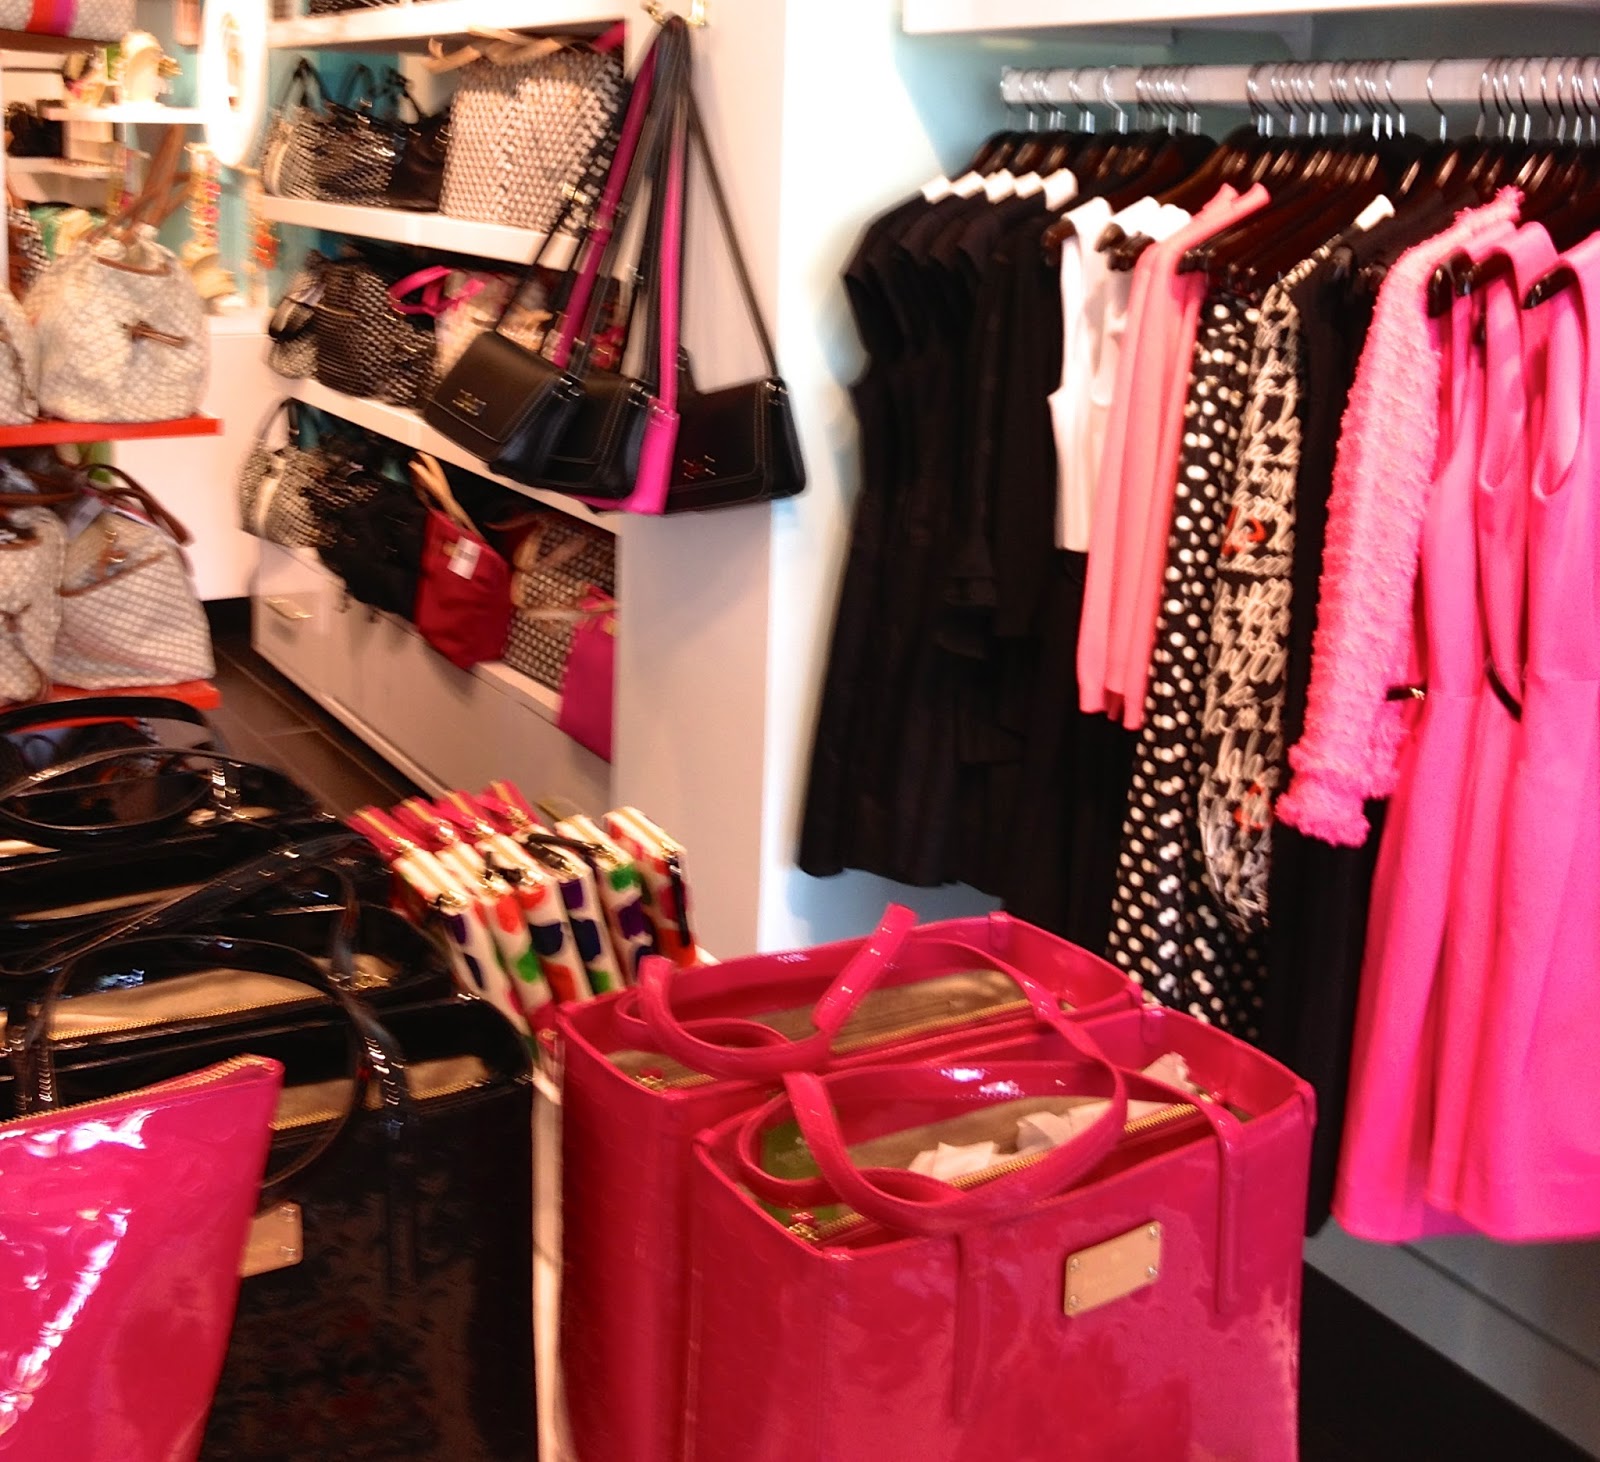 Big City Tyro: A Trip To The Kate Spade Outlet